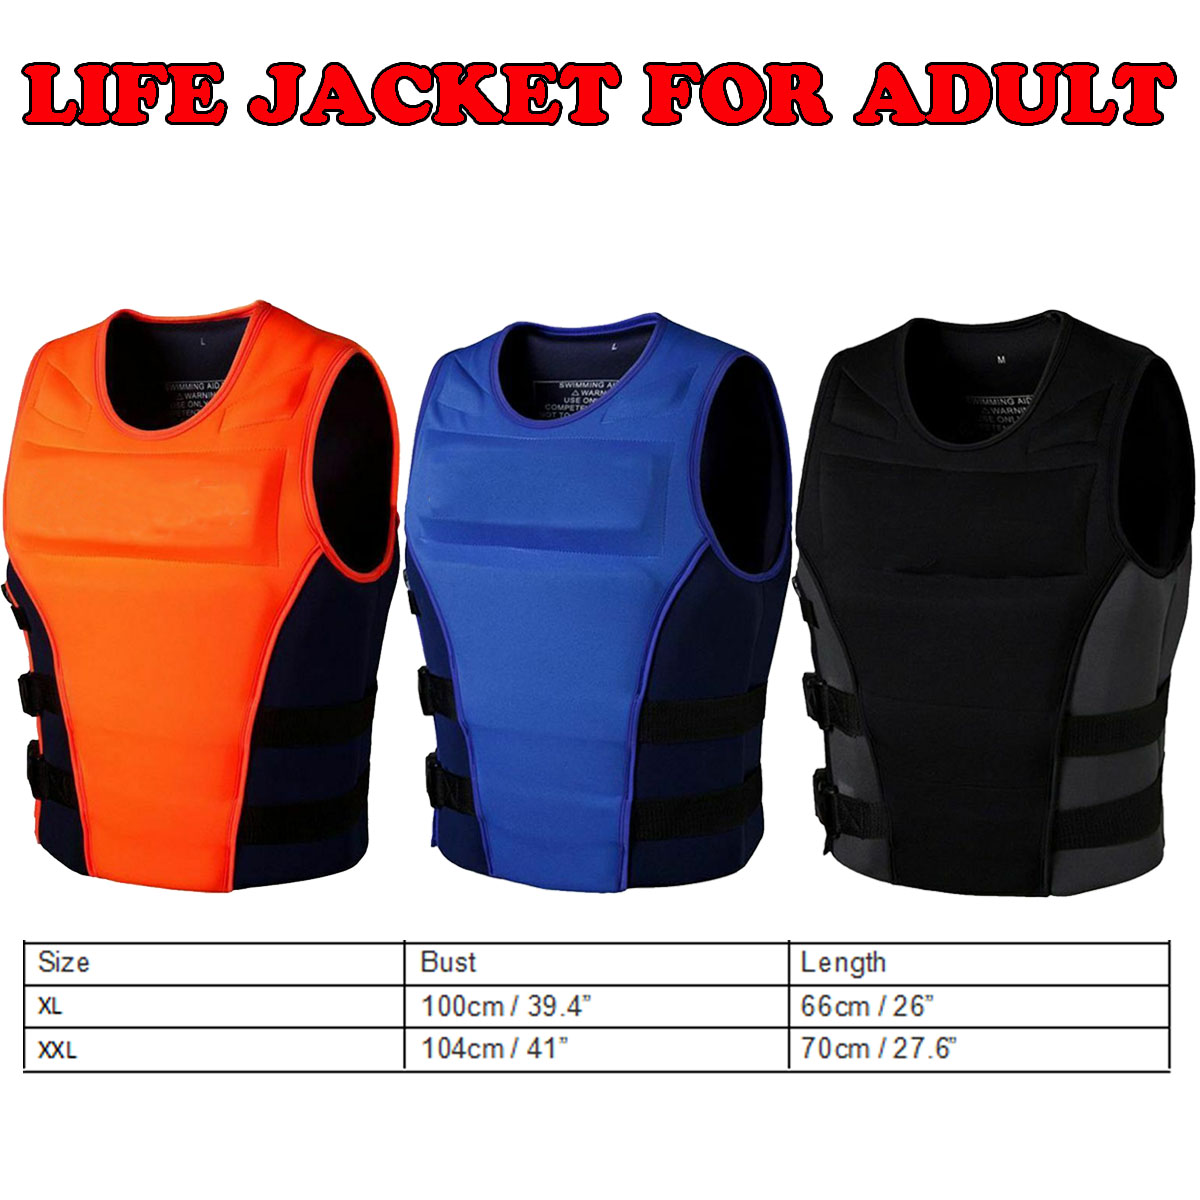 Outdoor-Rafting-Life-Jacket-for-Adult-Swimming-Snorkeling-Wear-Professional-Surfing-Aid-Life-Vest-1748600-3